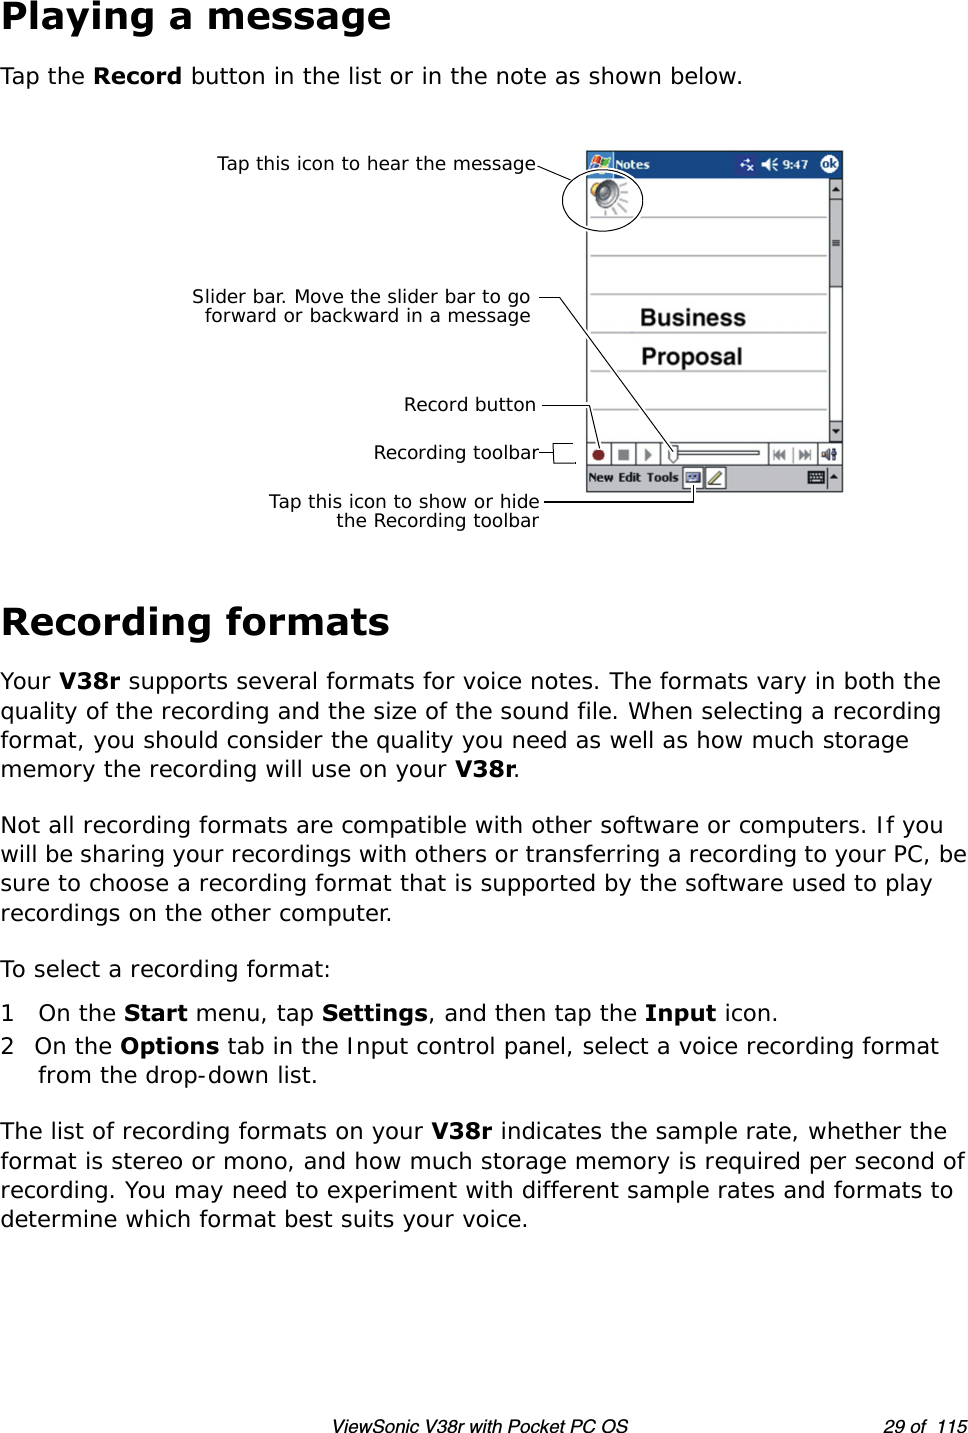 ViewSonic V38r with Pocket PC OS 29 of  115Playing a messageTap the Record button in the list or in the note as shown below.Recording formatsYour V38r supports several formats for voice notes. The formats vary in both the quality of the recording and the size of the sound file. When selecting a recording format, you should consider the quality you need as well as how much storage memory the recording will use on your V38r.Not all recording formats are compatible with other software or computers. If you will be sharing your recordings with others or transferring a recording to your PC, be sure to choose a recording format that is supported by the software used to play recordings on the other computer.To select a recording format:1On the Start menu, tap Settings, and then tap the Input icon.2On the Options tab in the Input control panel, select a voice recording format from the drop-down list.The list of recording formats on your V38r indicates the sample rate, whether the format is stereo or mono, and how much storage memory is required per second of recording. You may need to experiment with different sample rates and formats to determine which format best suits your voice.Tap this icon to hear the messageSlider bar. Move the slider bar to goforward or backward in a messageTap this icon to show or hidethe Recording toolbarRecording toolbarRecord button